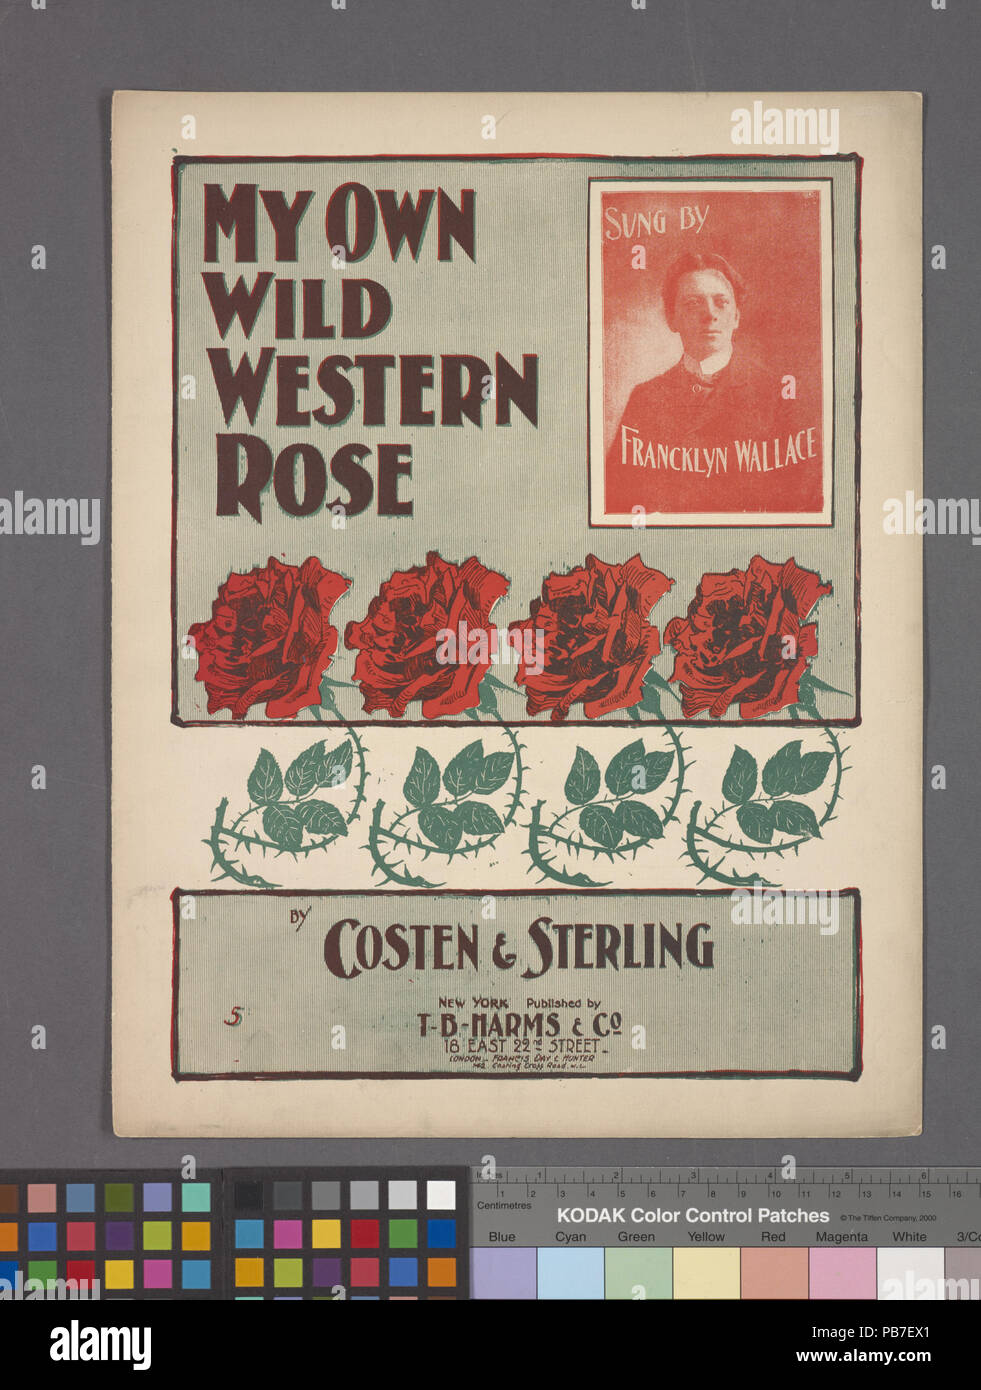 1077 Mon propre wild Western Rose (NYPL)-609122-1257105 Hades Banque D'Images